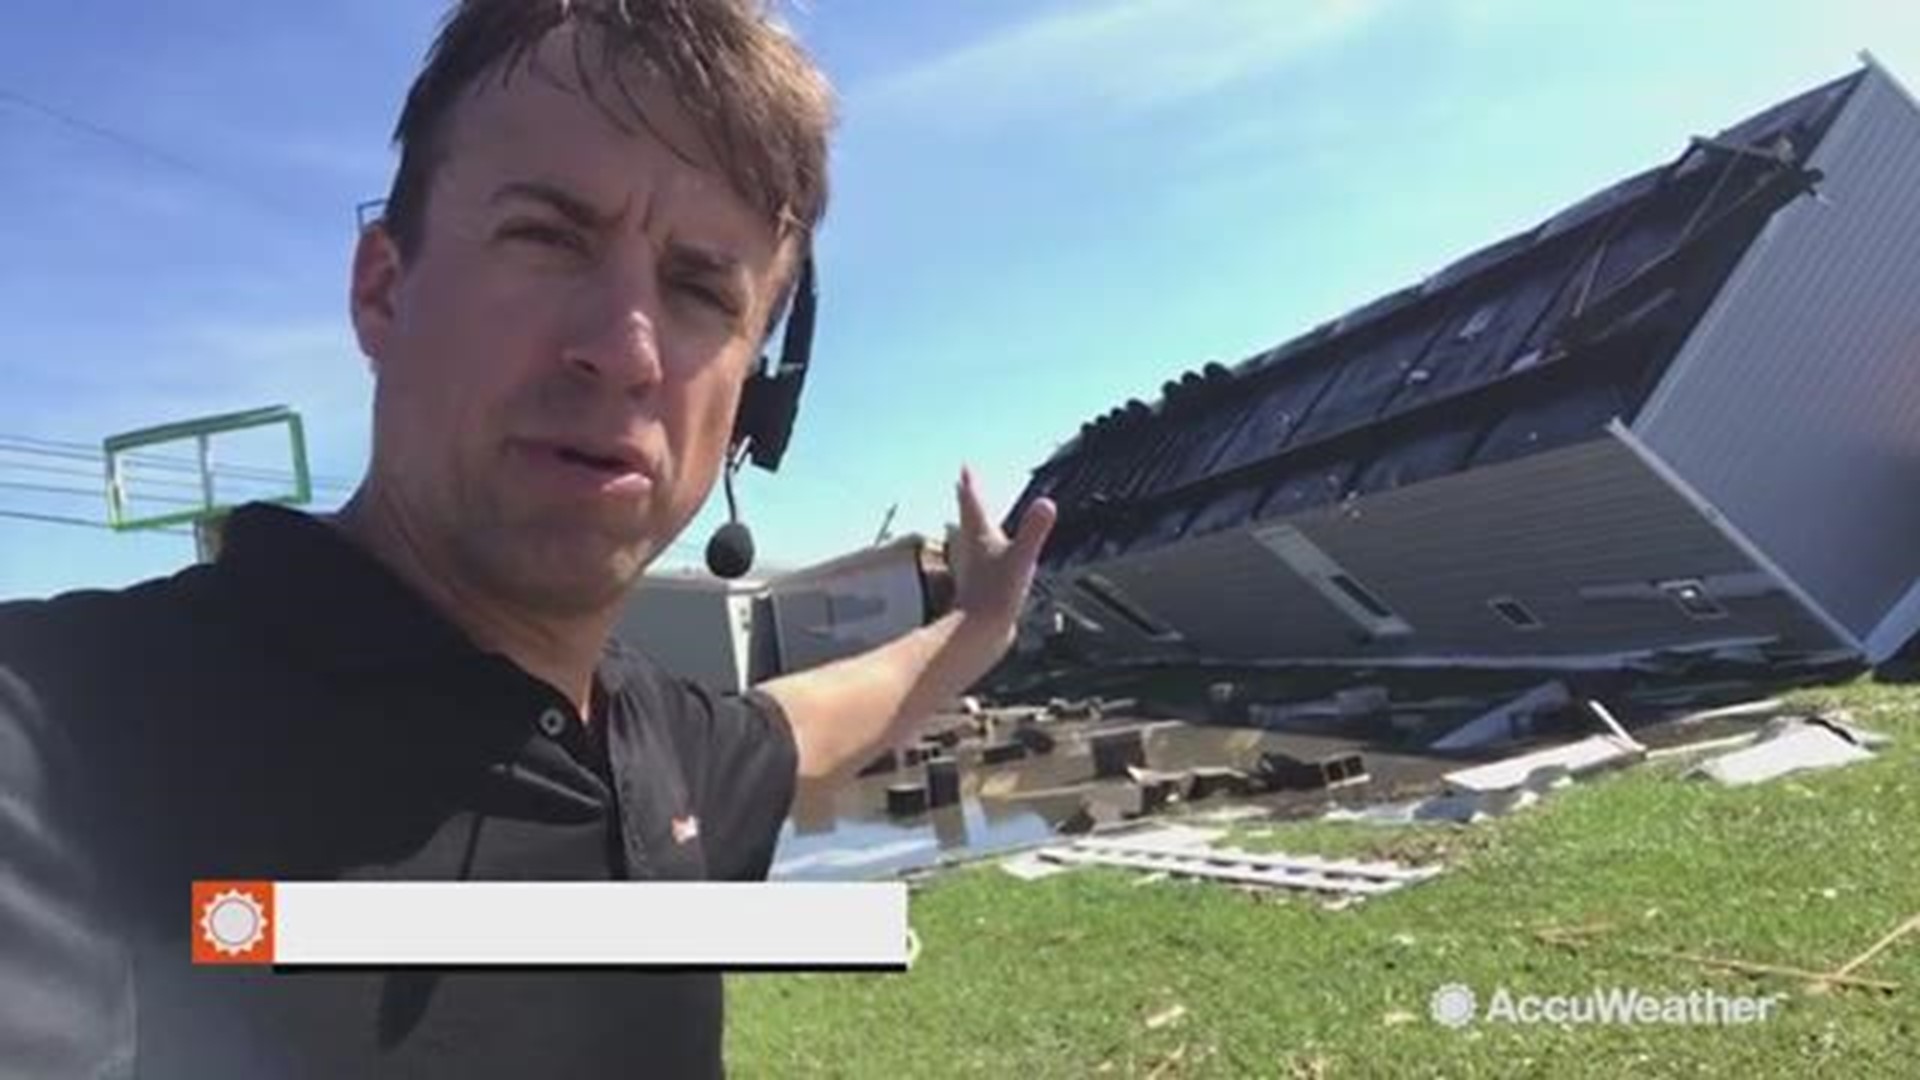 Reed Timmer is on the east side of Panama City, showing the extensive damage from being near the west eye wall of category 4 Hurricane Michael.